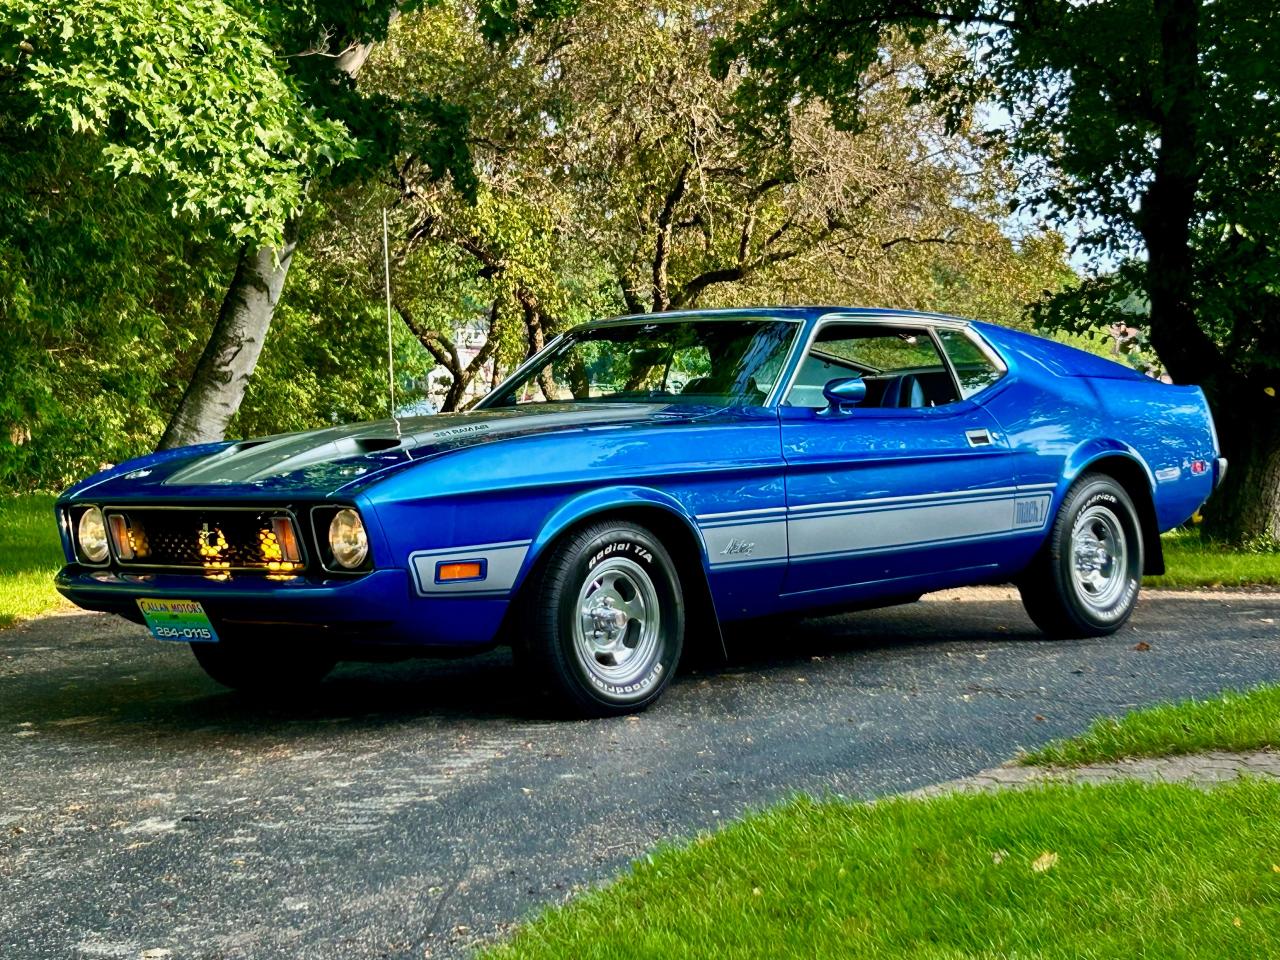 1973 Ford Mustang Mach 1 SPORTSROOF - Photo #26